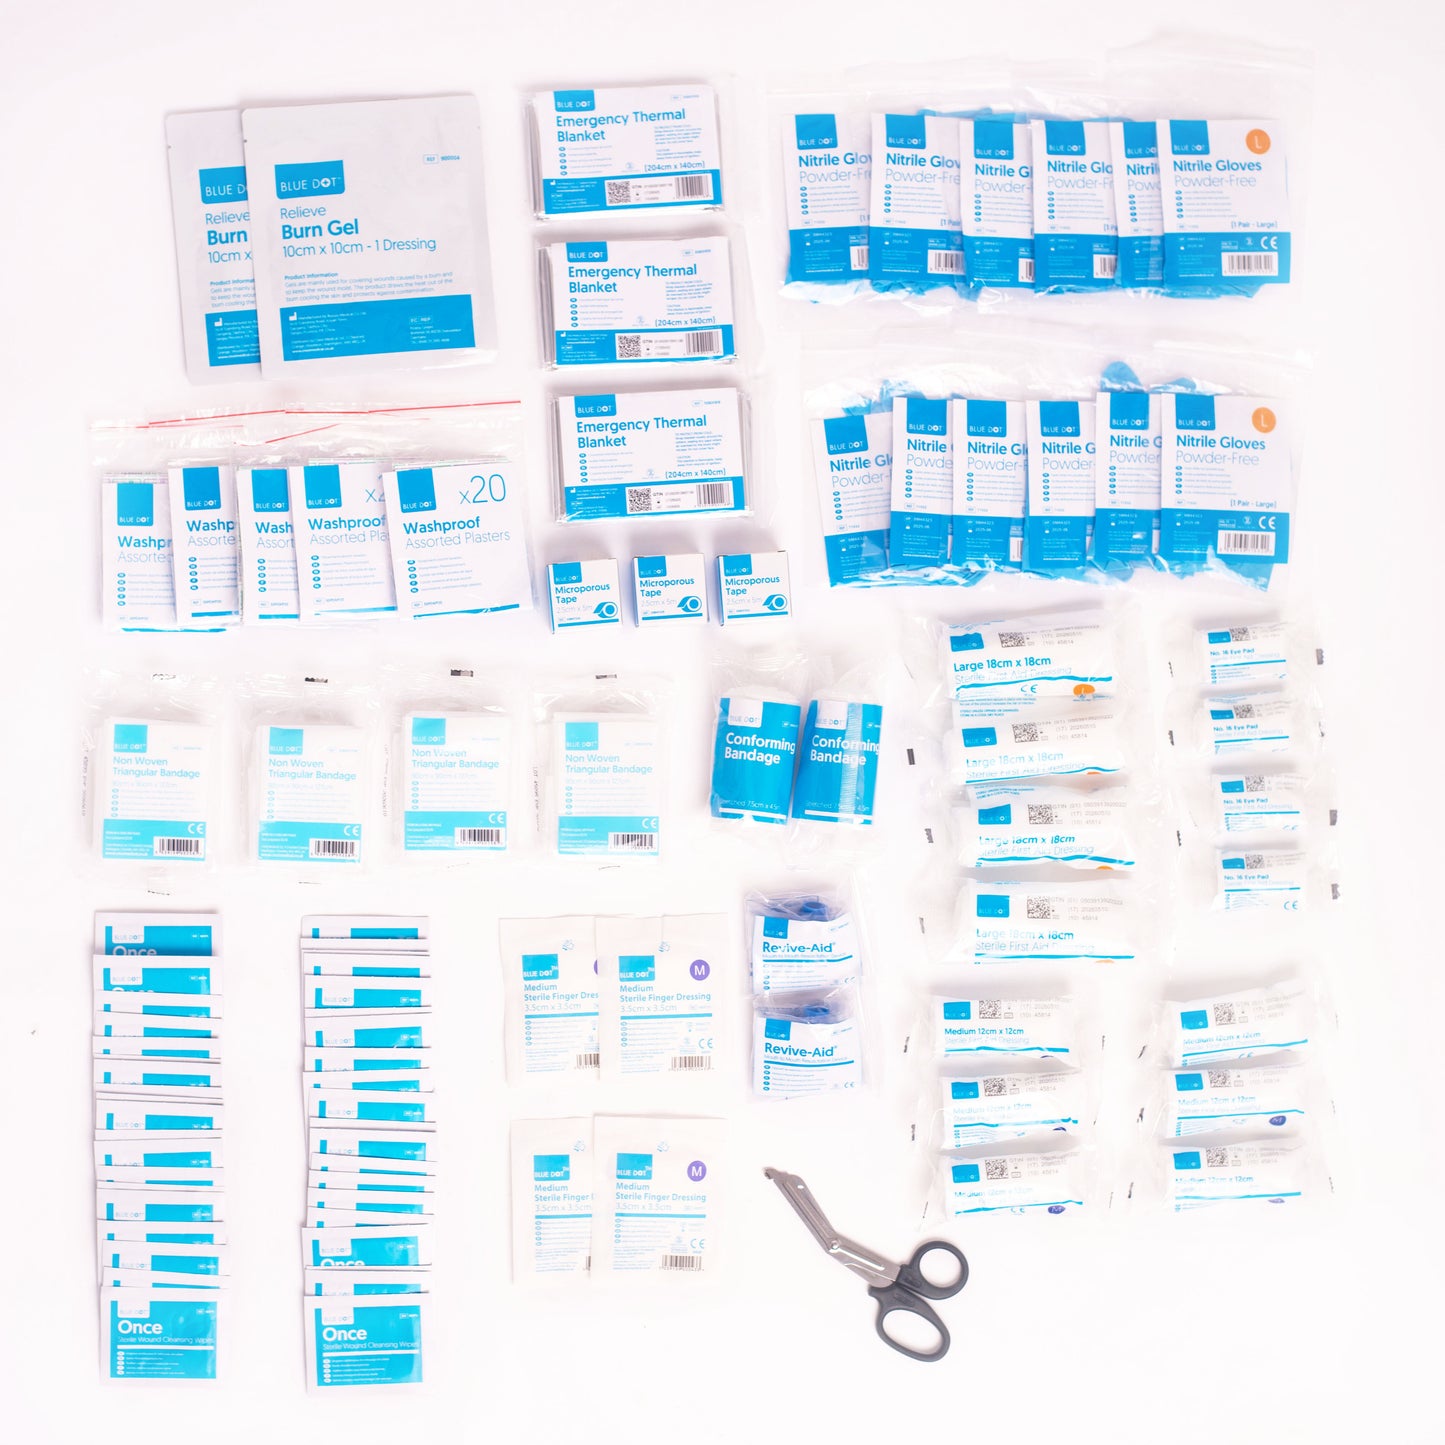 HOME AND WORKPLACE FIRST AID KIT - BS 8599-1:2019 COMPLIANT